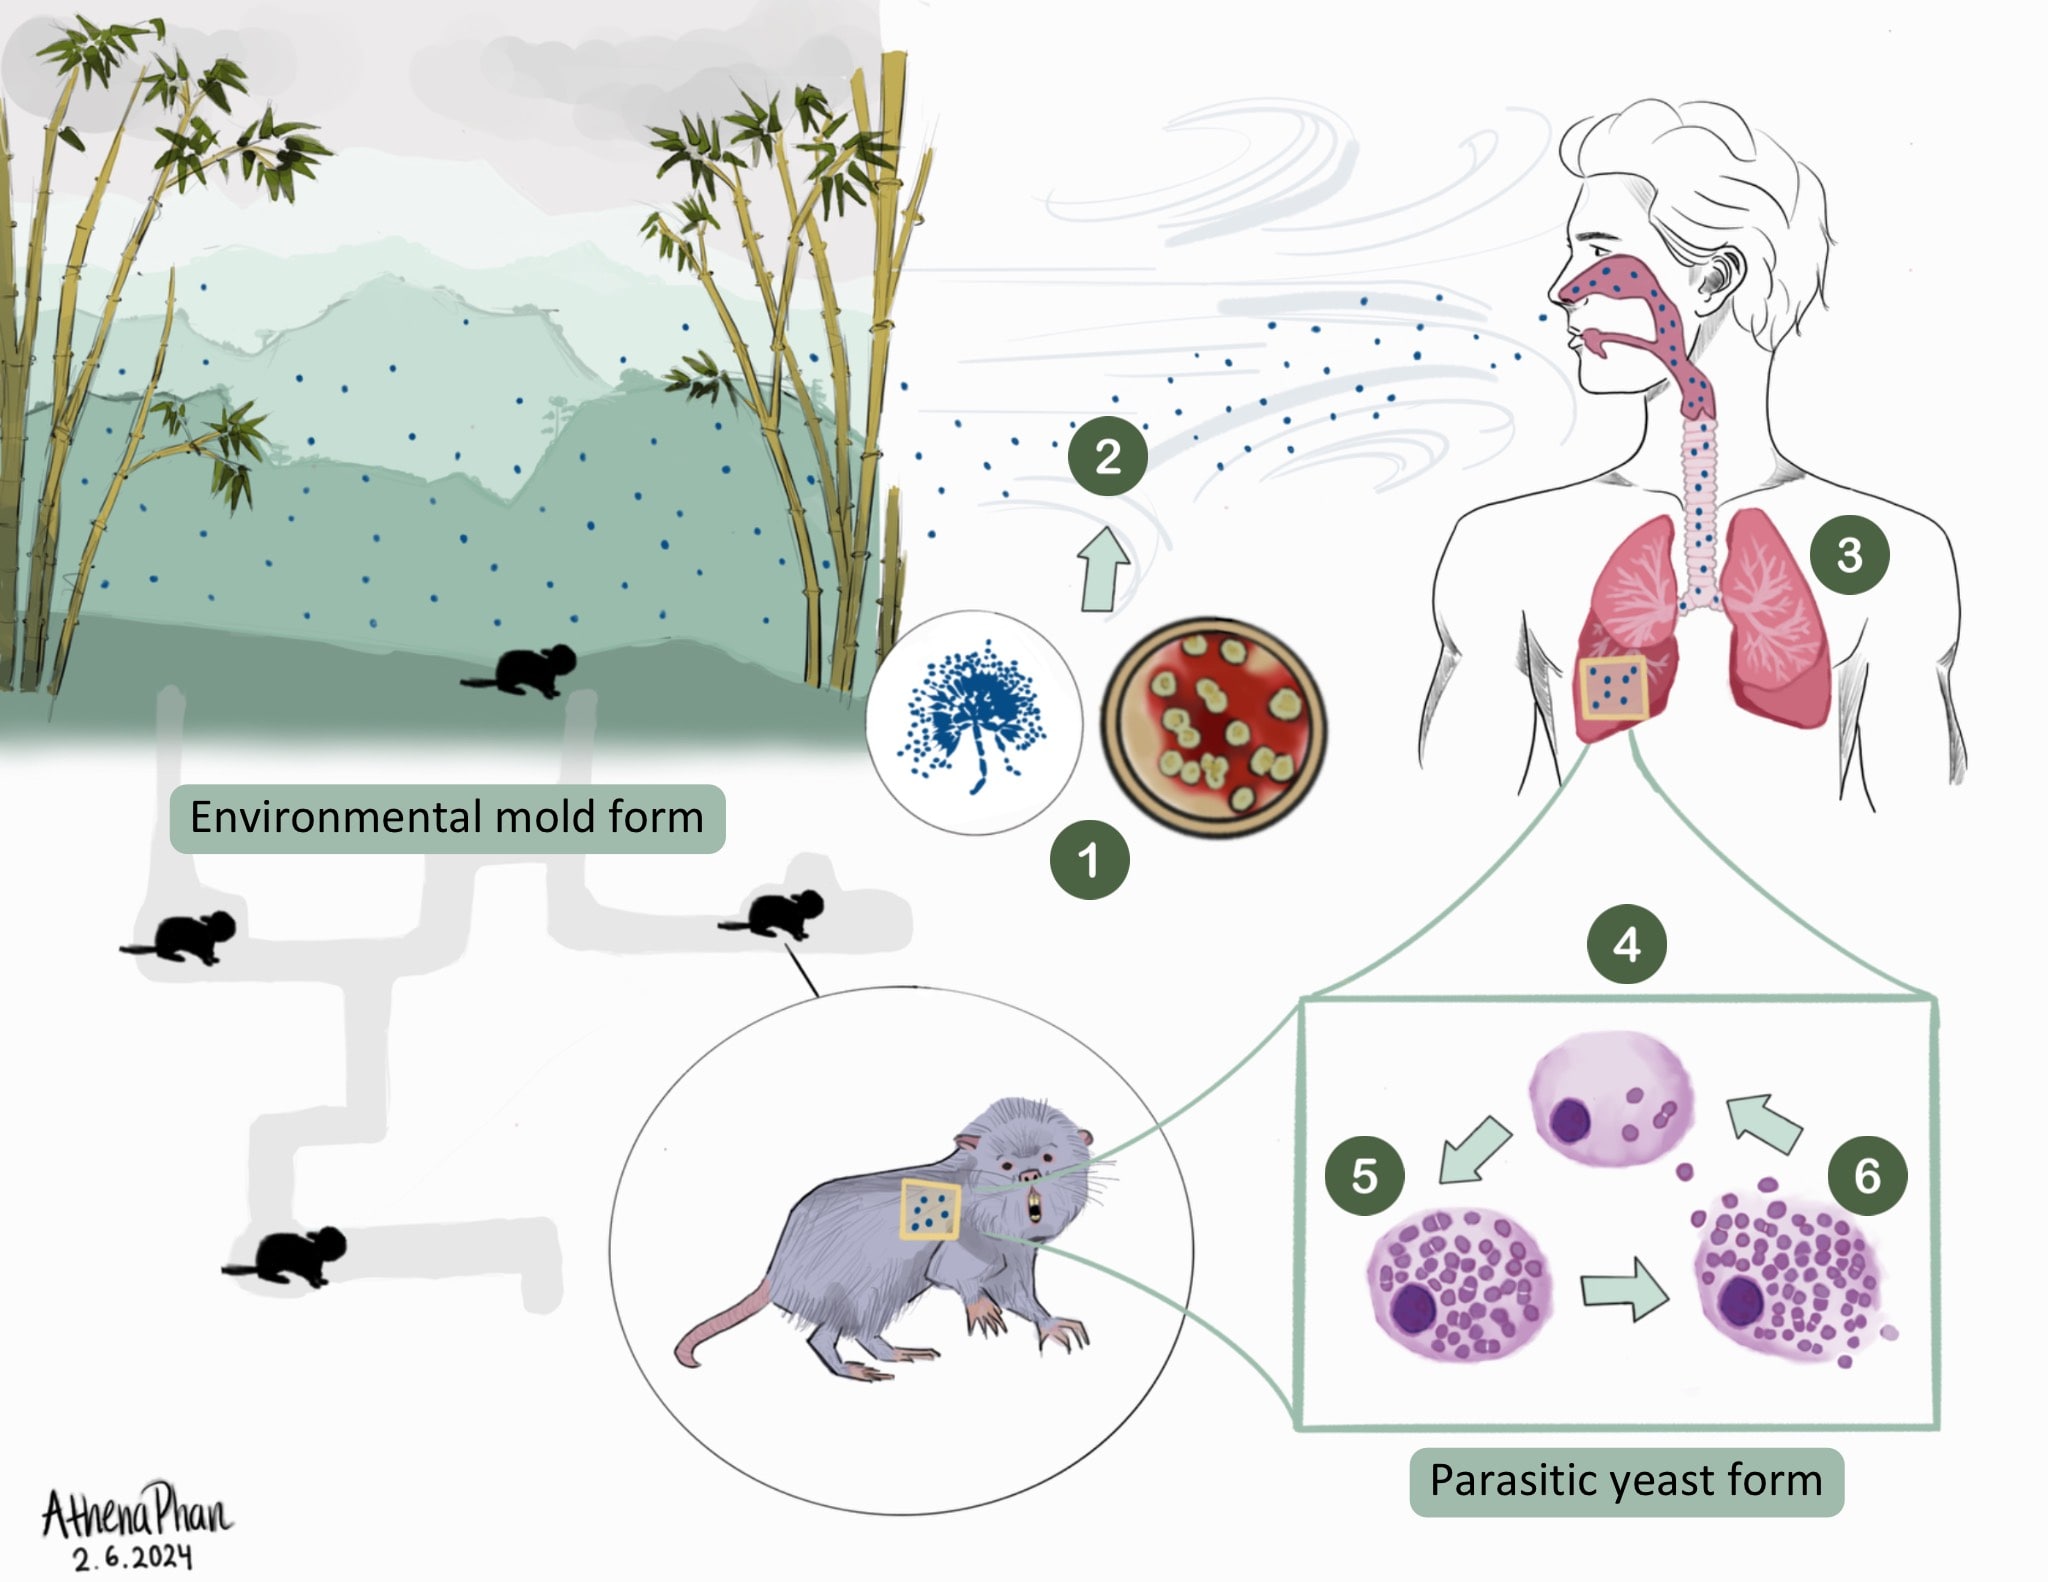 image of Talaromyces in outdoor environment as mold spores with diagrams of the spores being inhaled by bamboo rats and by a human. In both they turn to parasitic yeast.